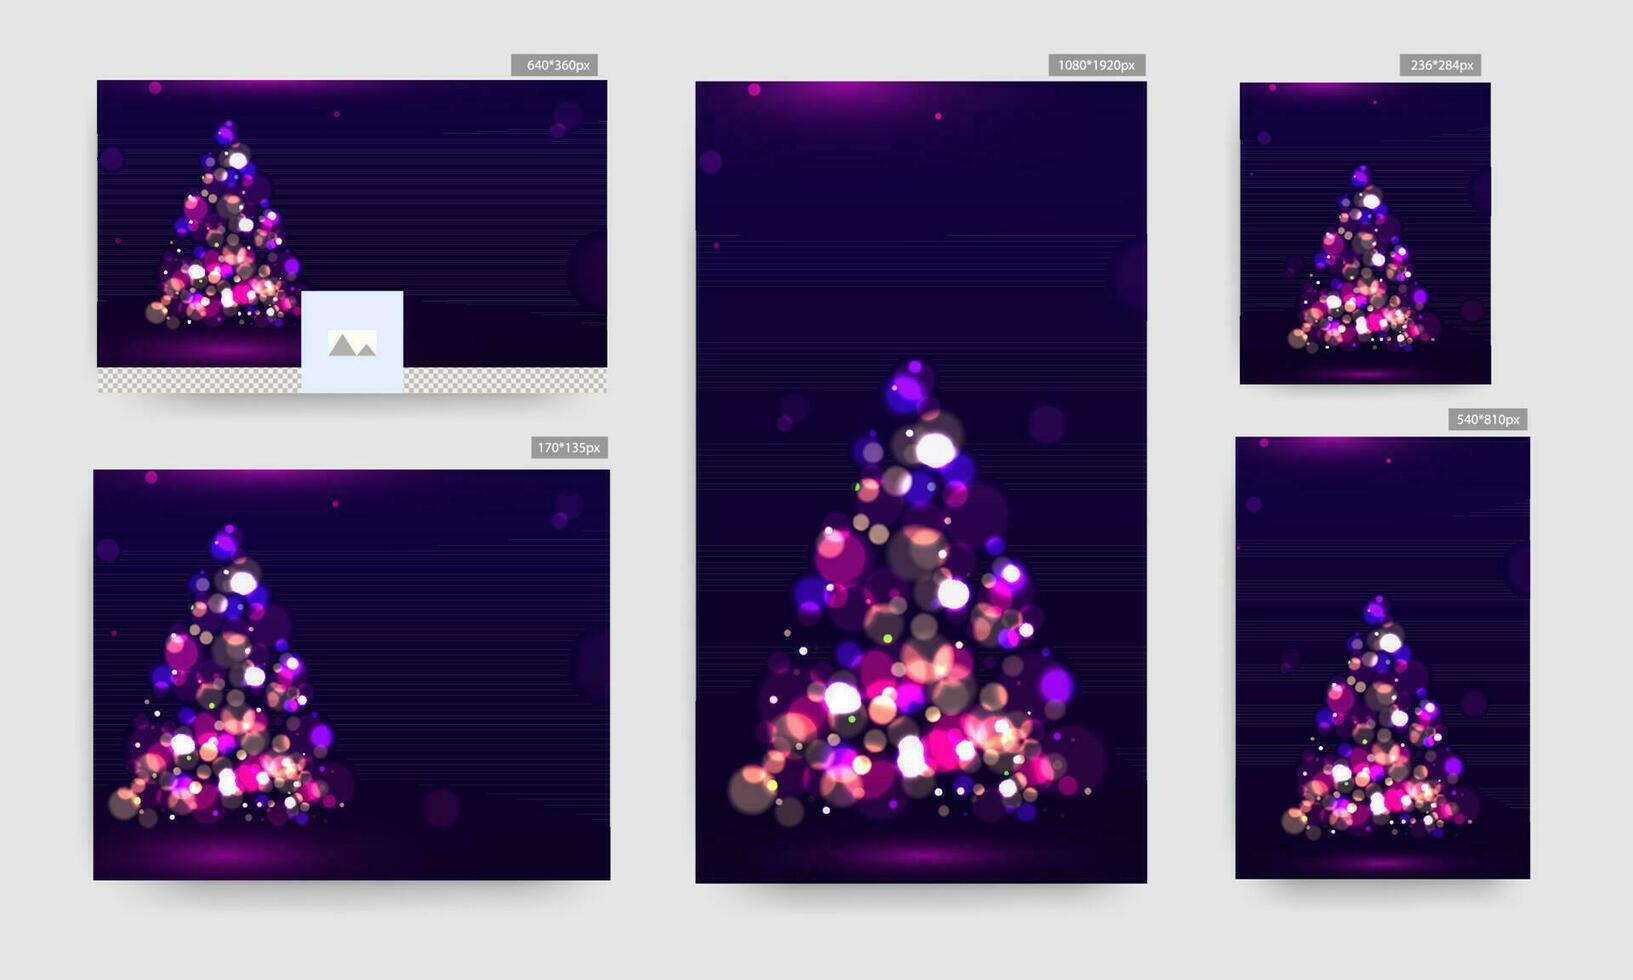 Purple Banner, Poster and Template Design with Creative Xmas Tree Made by Bokeh Lighting Effect for Merry Christmas Celebration. vector